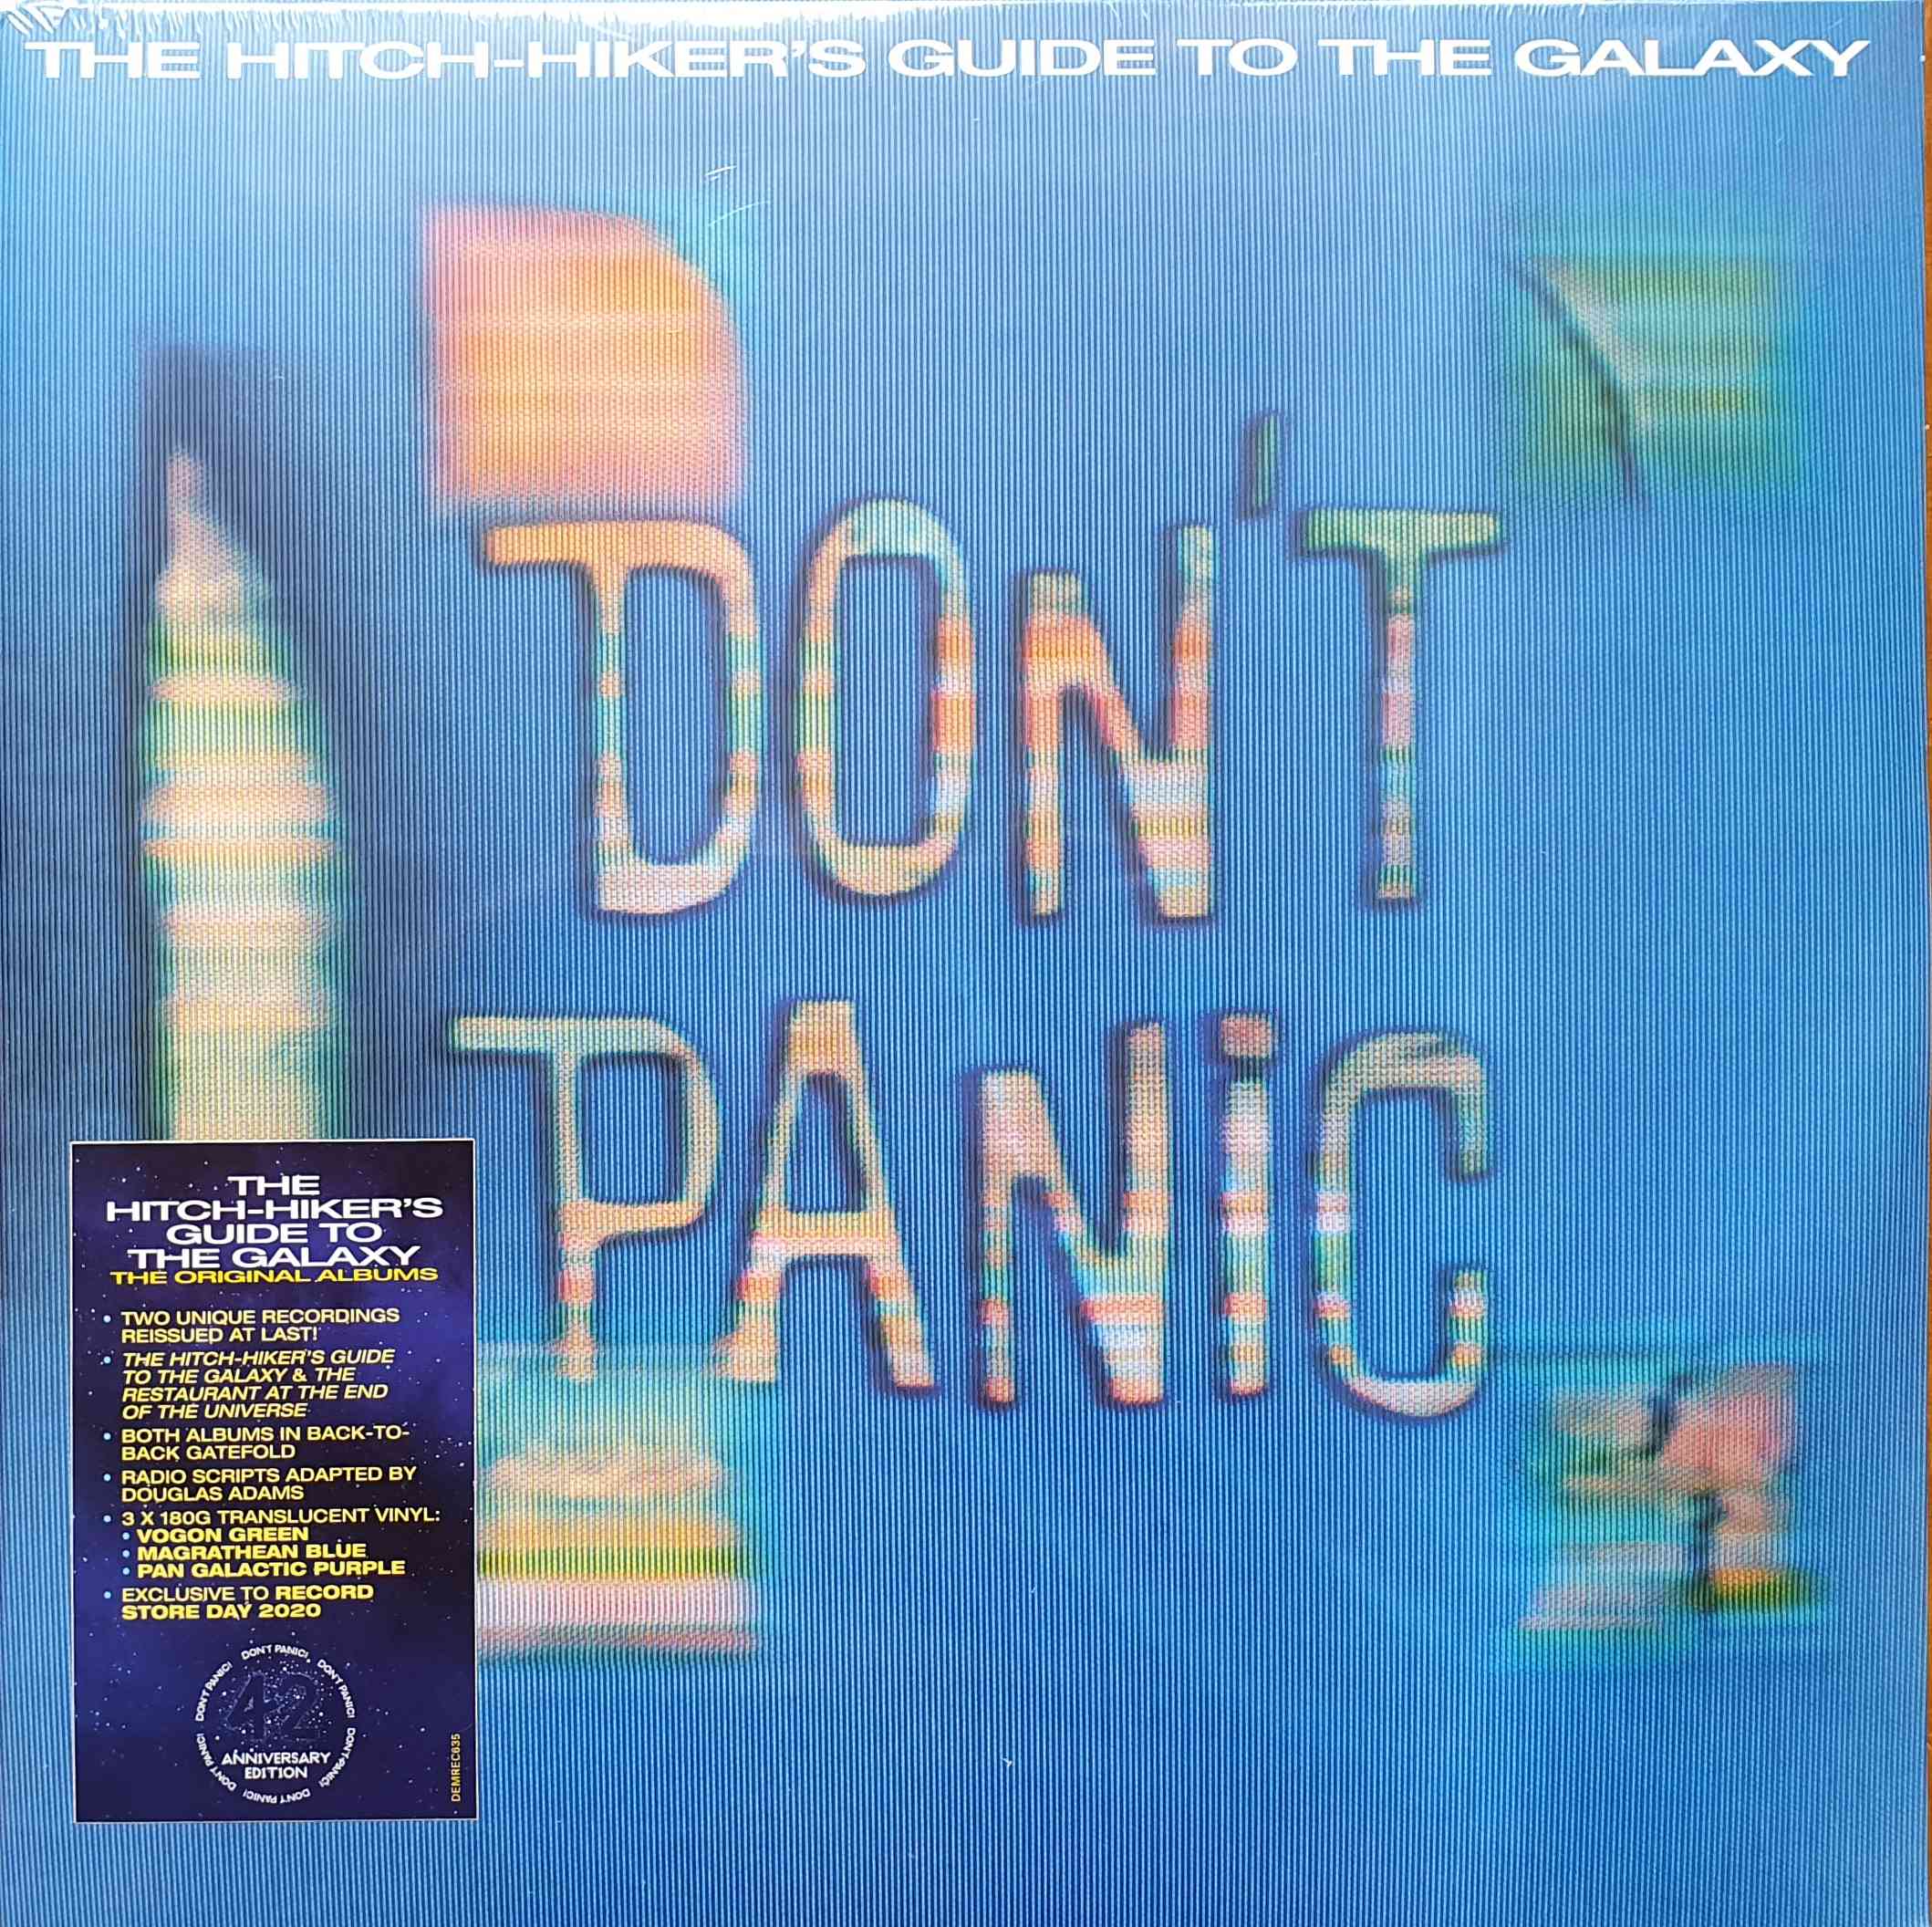 Picture of DEMREC 635 The hitch-hiker's guide to the galaxy / The restaurant at the end of the universe (Limited edition coloured vinyl RSD 2020) by artist Douglas Adams from the BBC albums - Records and Tapes library